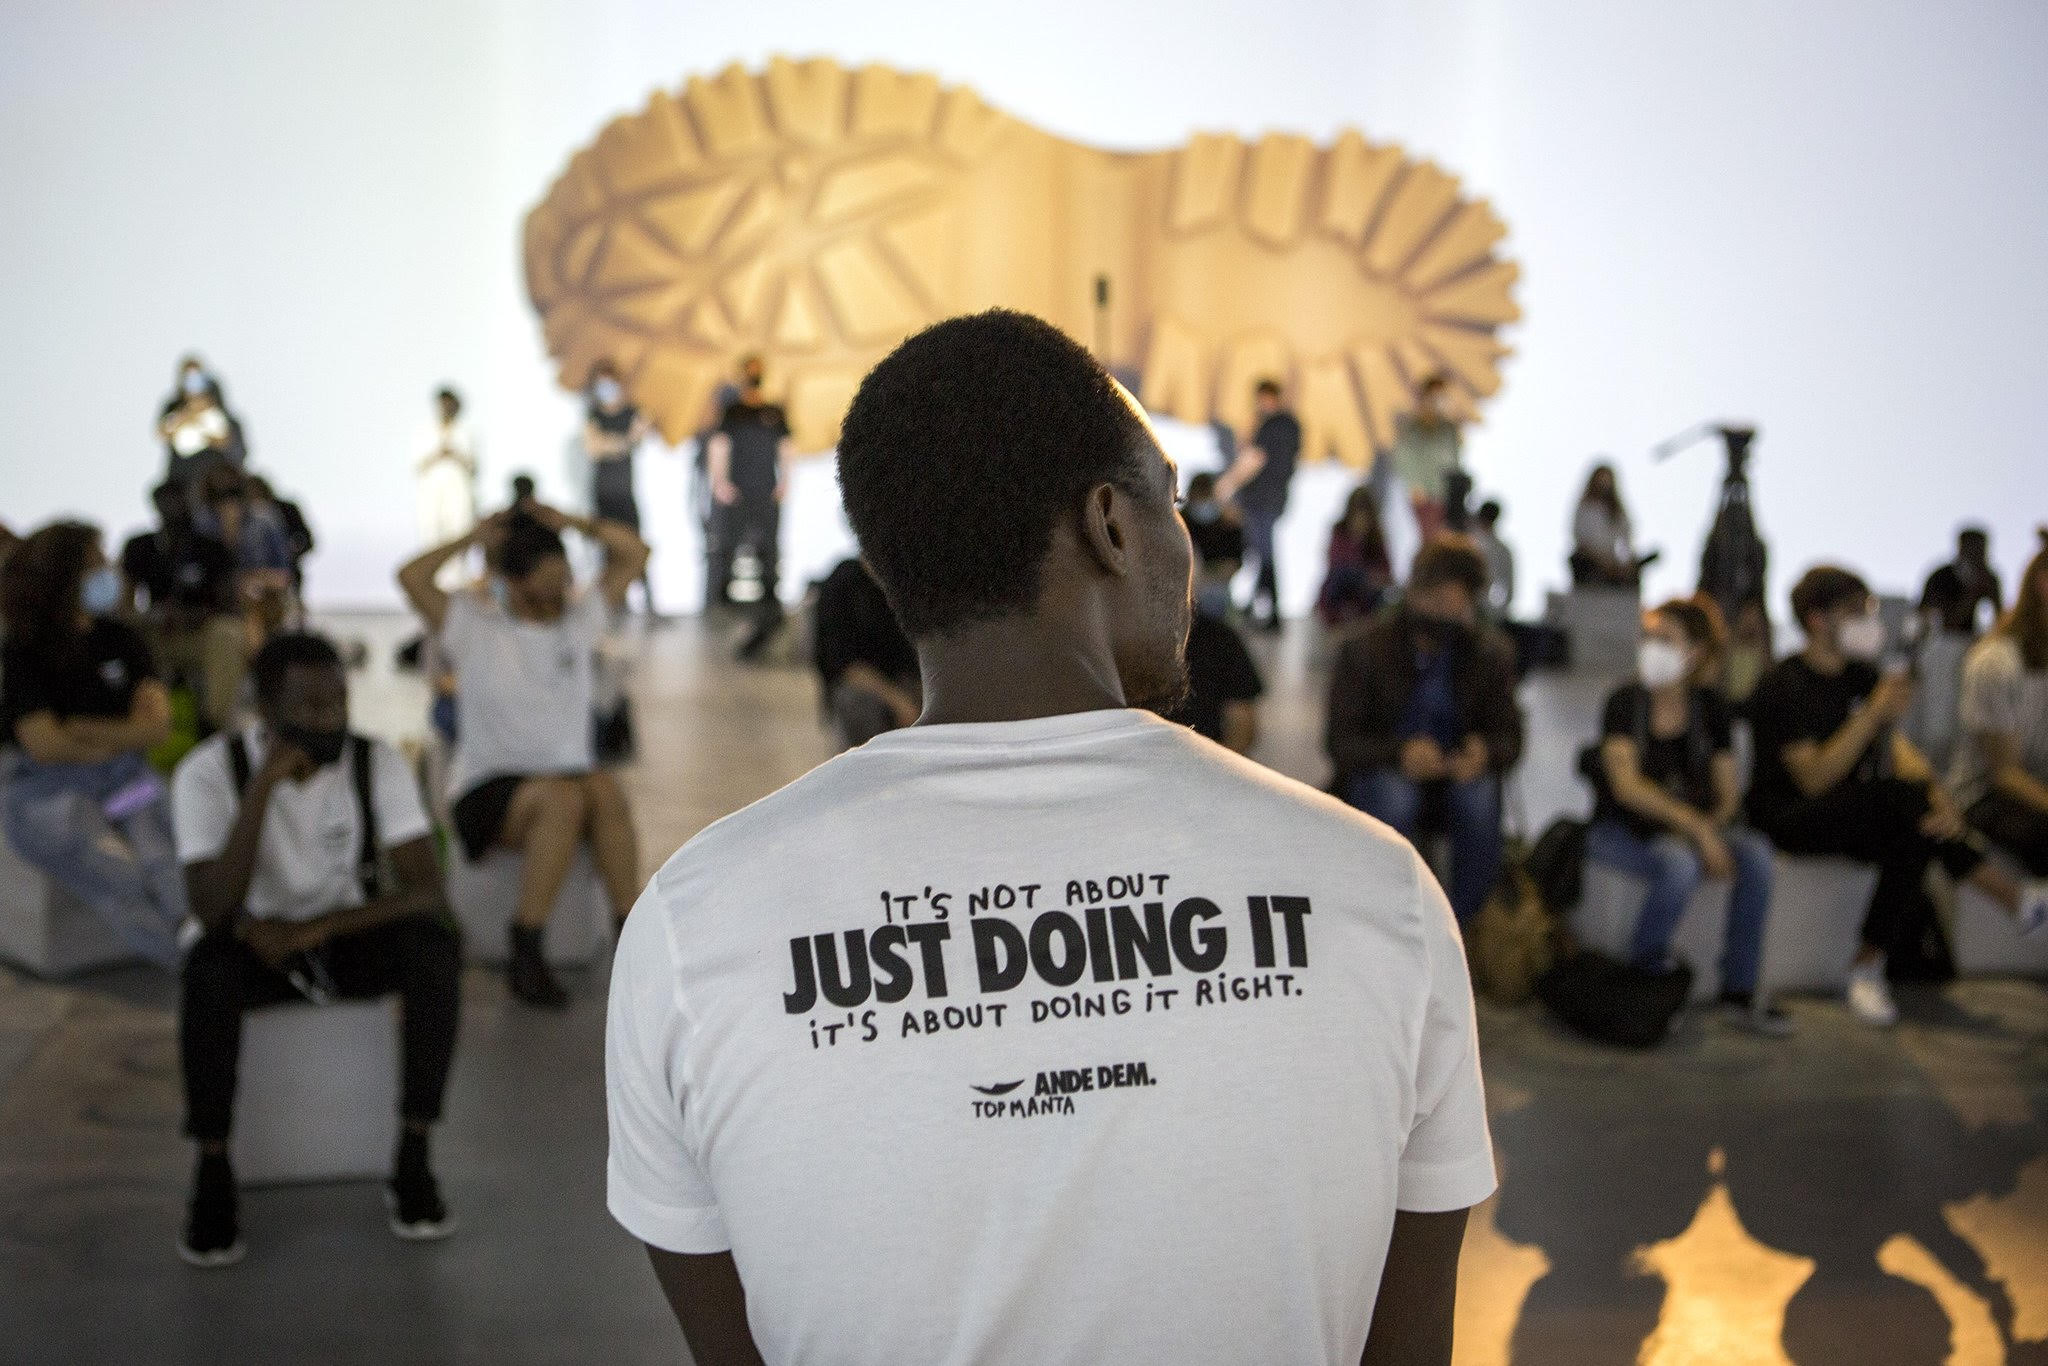 A Black man wearing Top Manta gear that reads "It's not about just doing it, it's about doing it right."